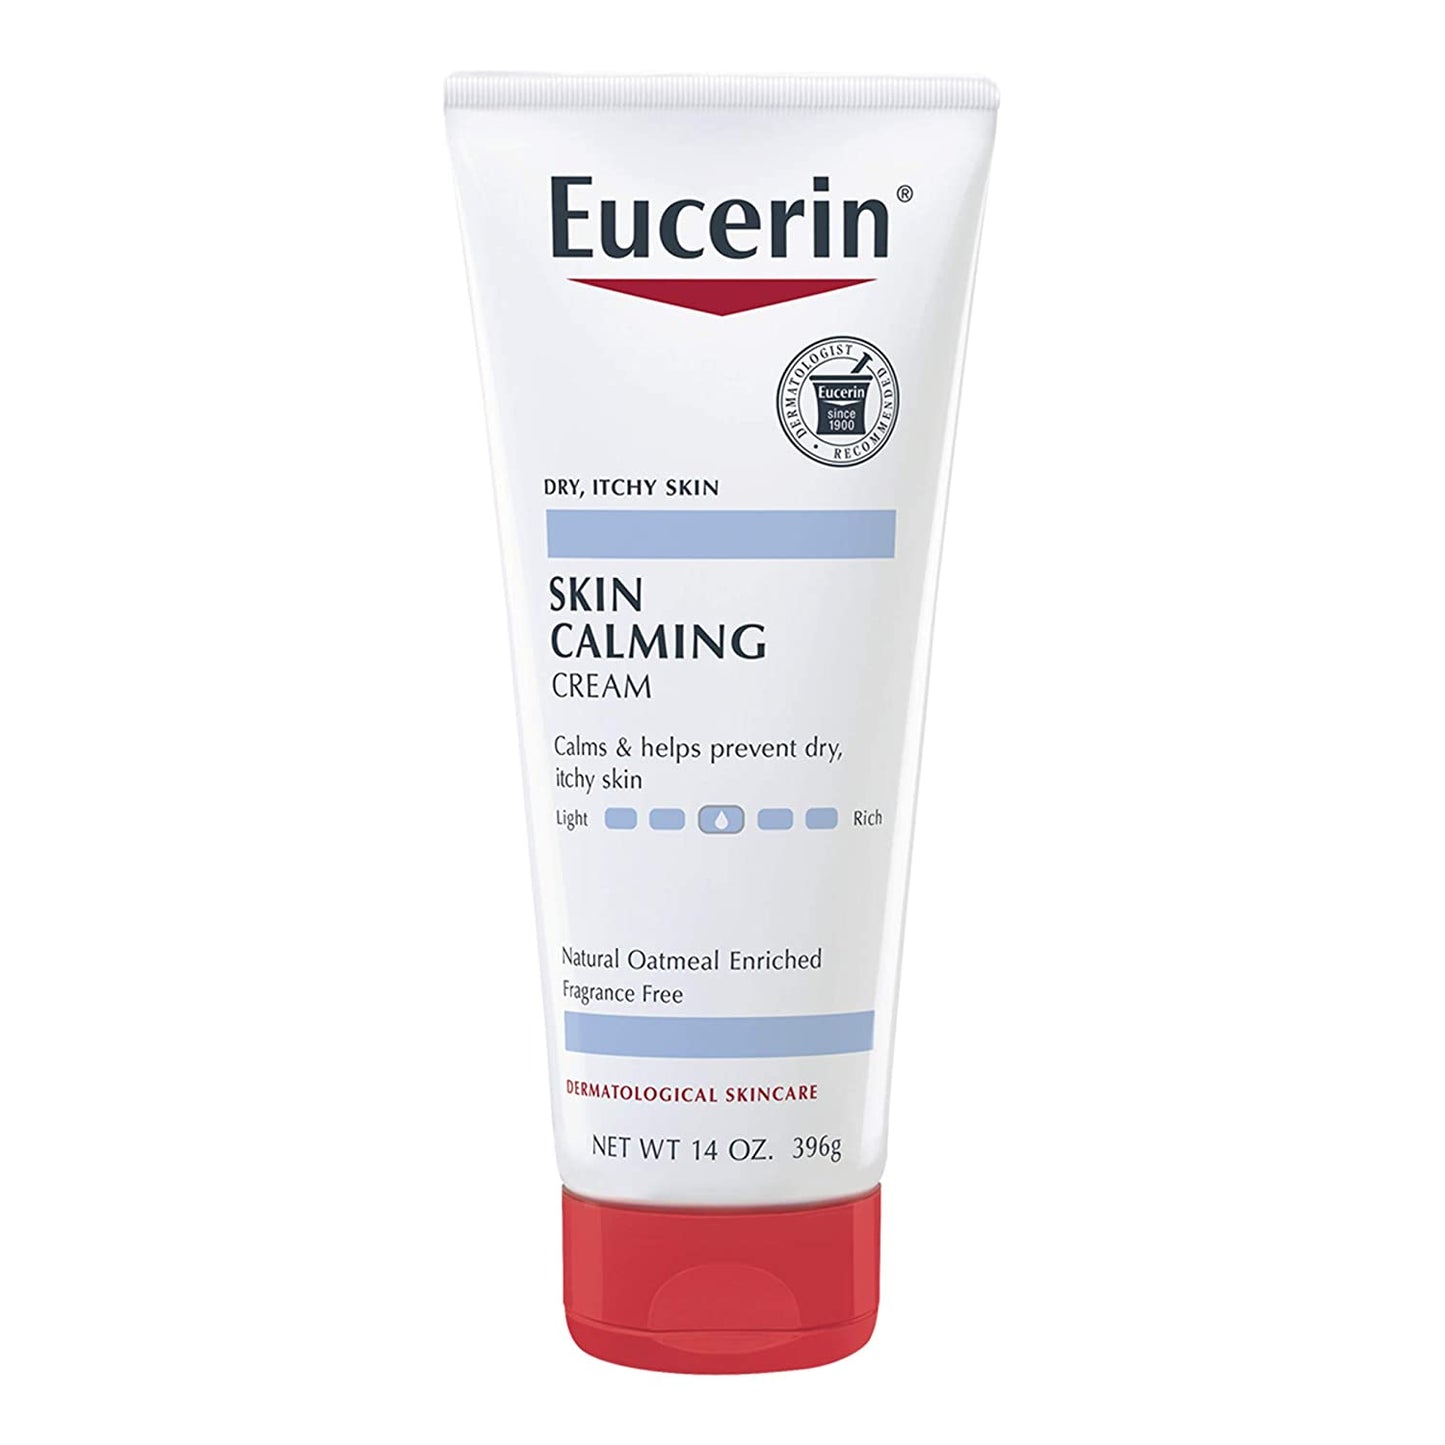 Eucerin Skin Calming Itch Soothing Cream Natural Oatmeal Enriched 14 oz. / 396g